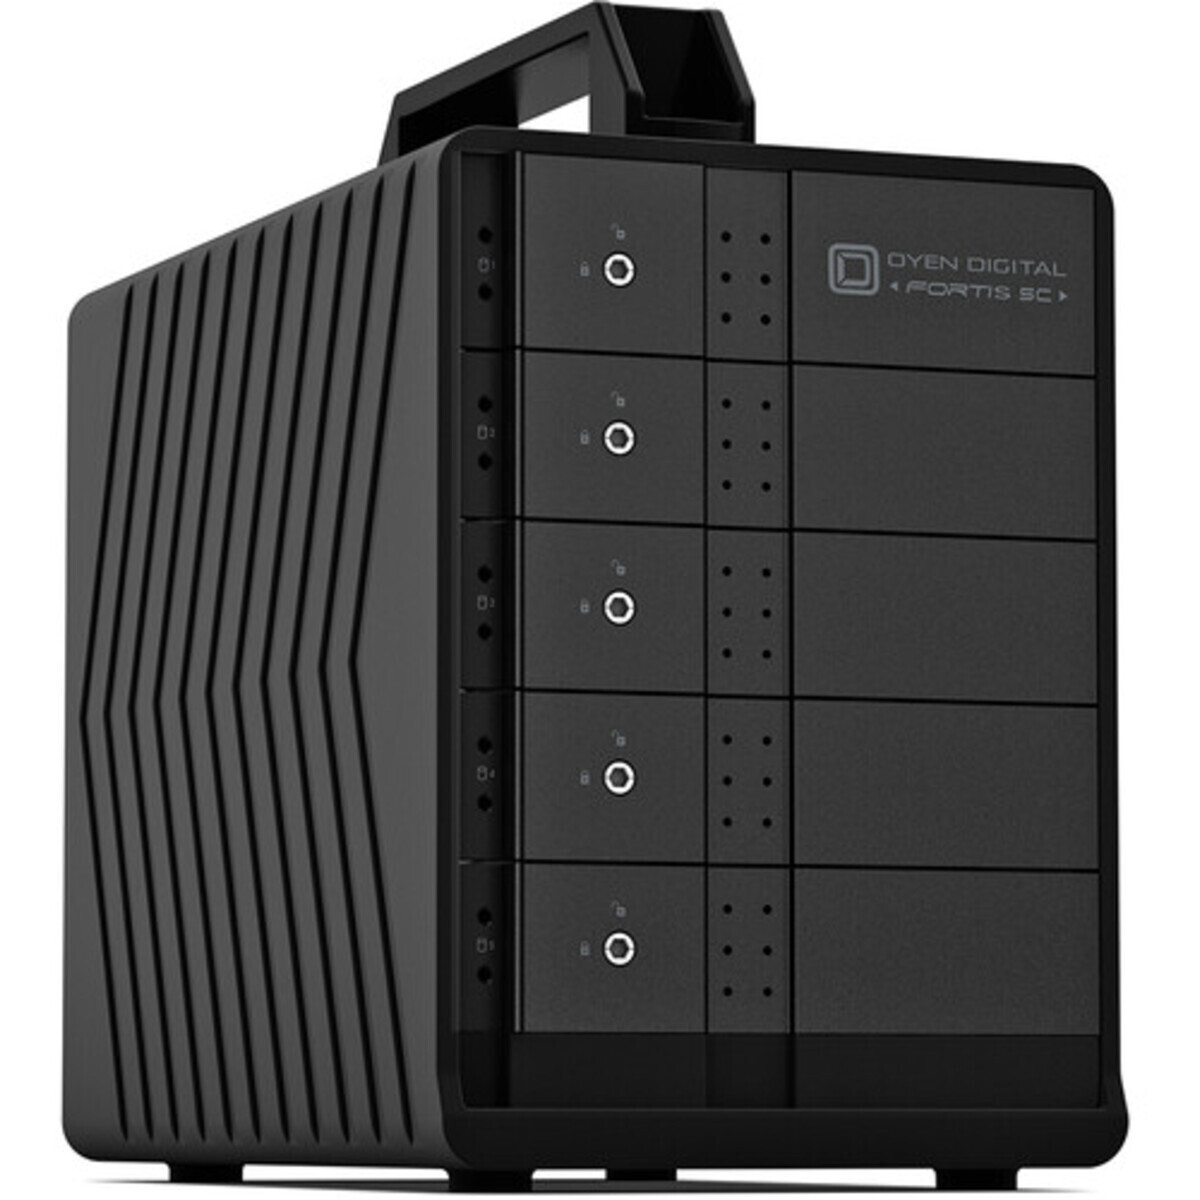 OYEN Fortis 5C 40tb 5-Bay Desktop Multimedia / Power User / Business DAS - Direct Attached Storage Device 5x8tb Seagate BarraCuda ST8000DM004 3.5 5400rpm SATA 6Gb/s HDD CONSUMER Class Drives Installed - Burn-In Tested Fortis 5C